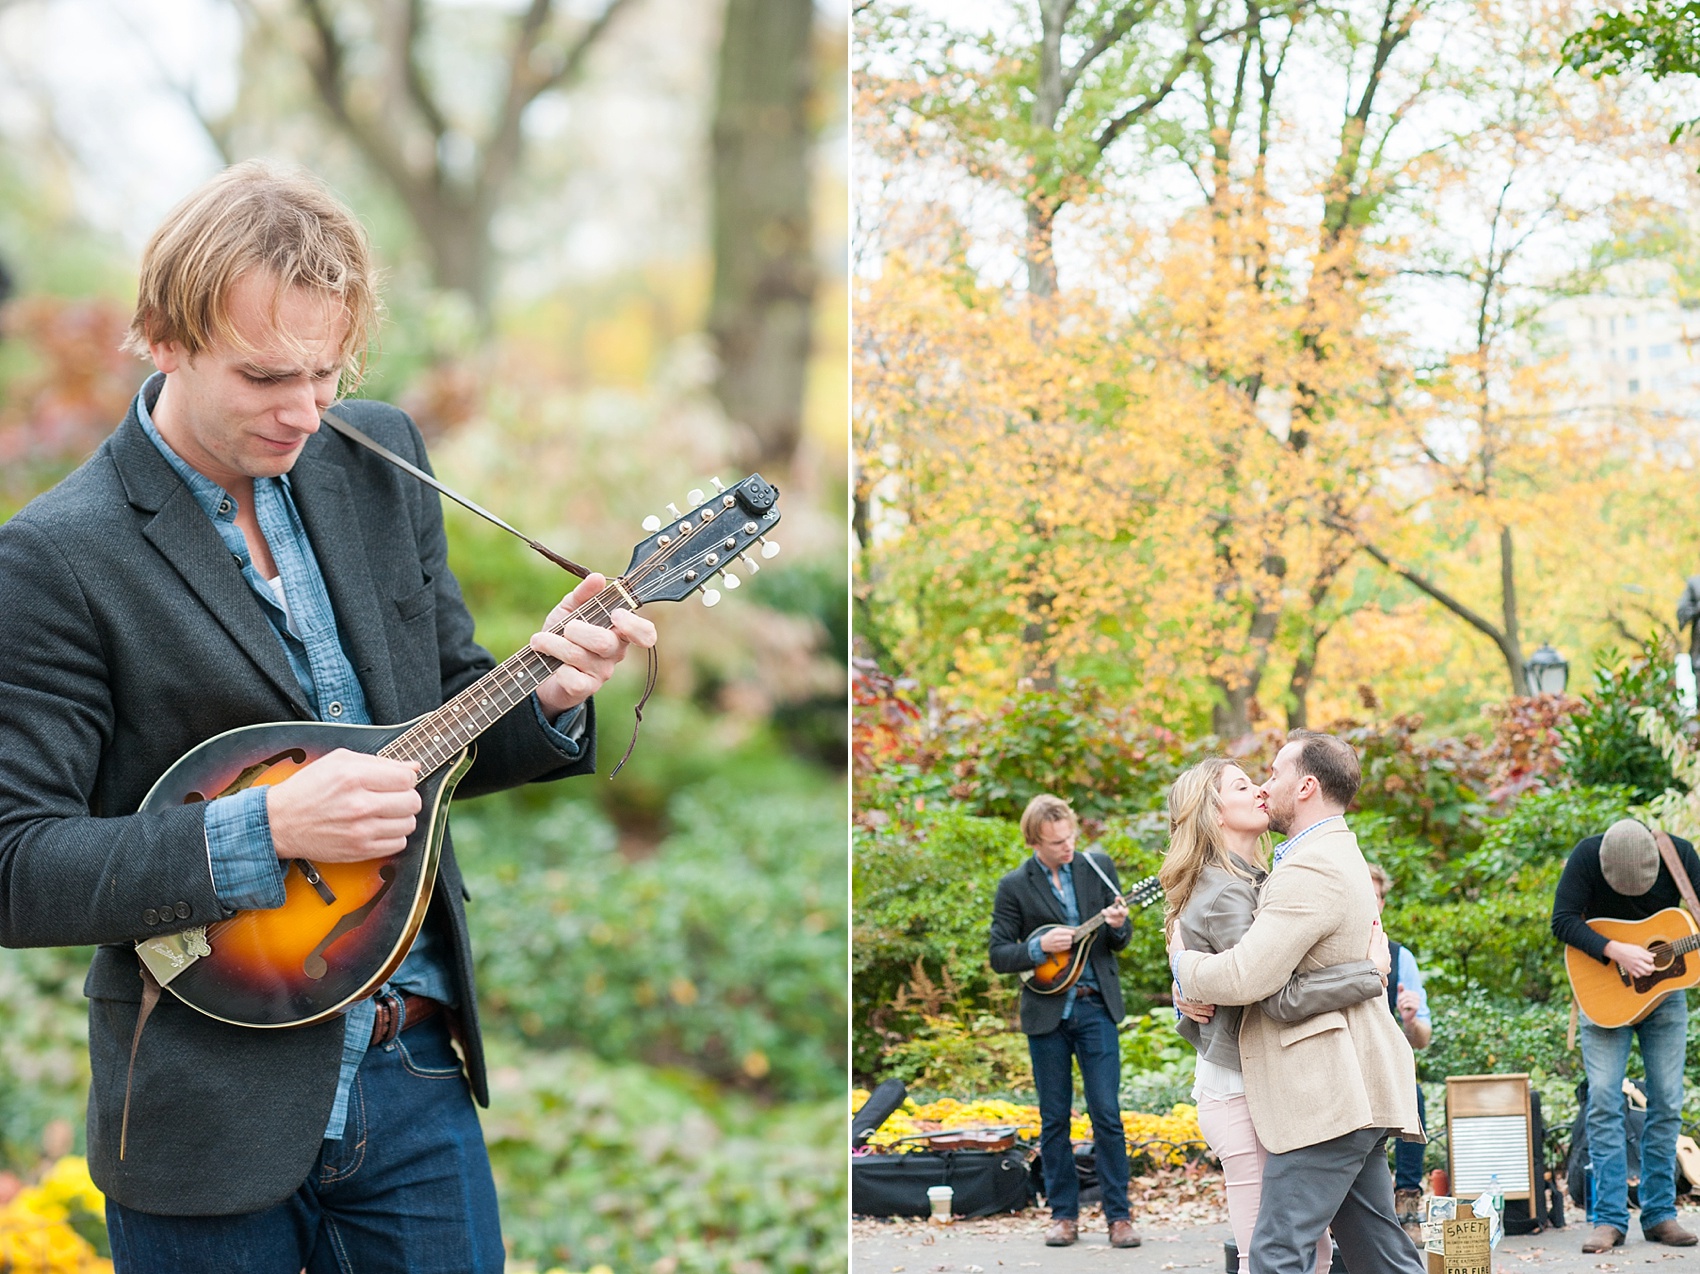 Central Park fall engagement photos in NYC by New York City wedding photographer, Mikkel Paige Photography. The band is The Good Morning Nags, playing near Literary Walk.